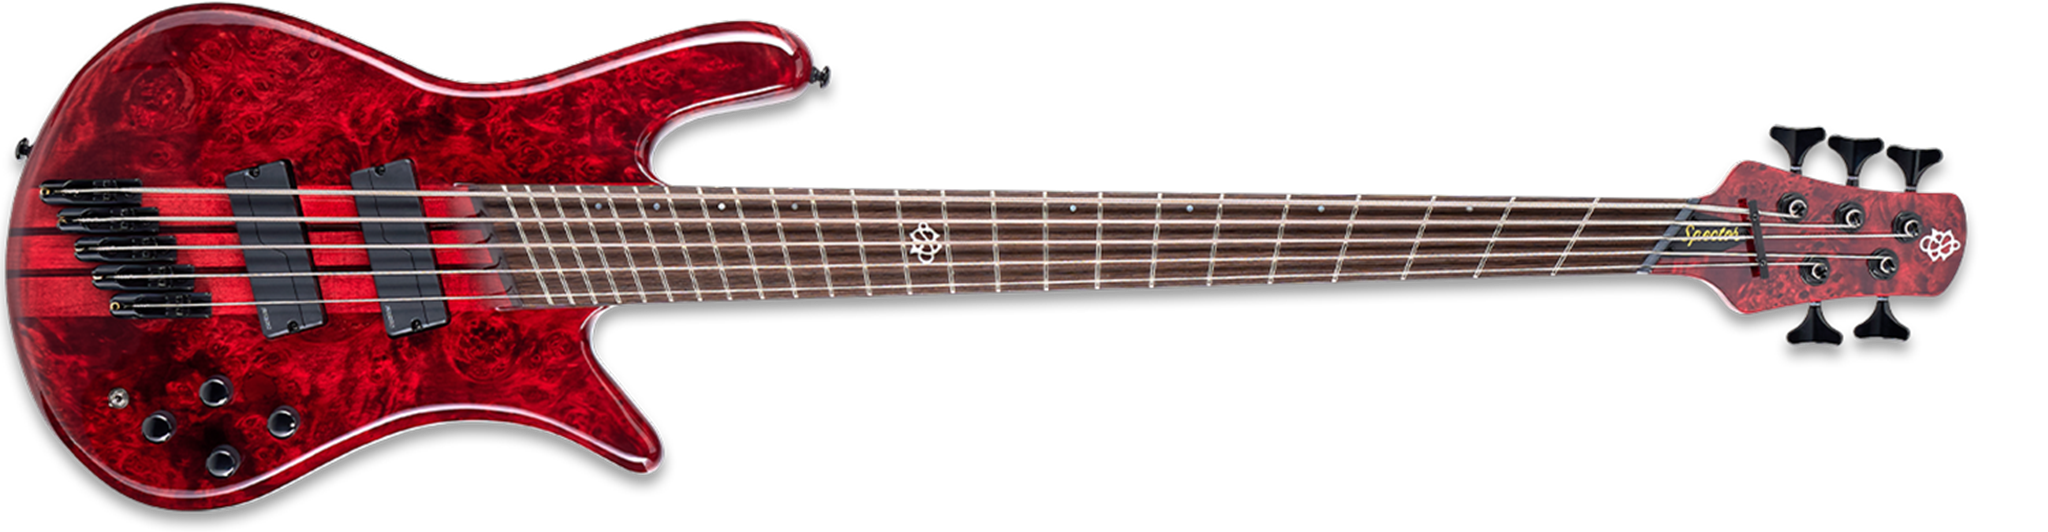 	Spector NS Dimension 5 - Multi Scale -Inferno Red  5-String Bass Guitar 